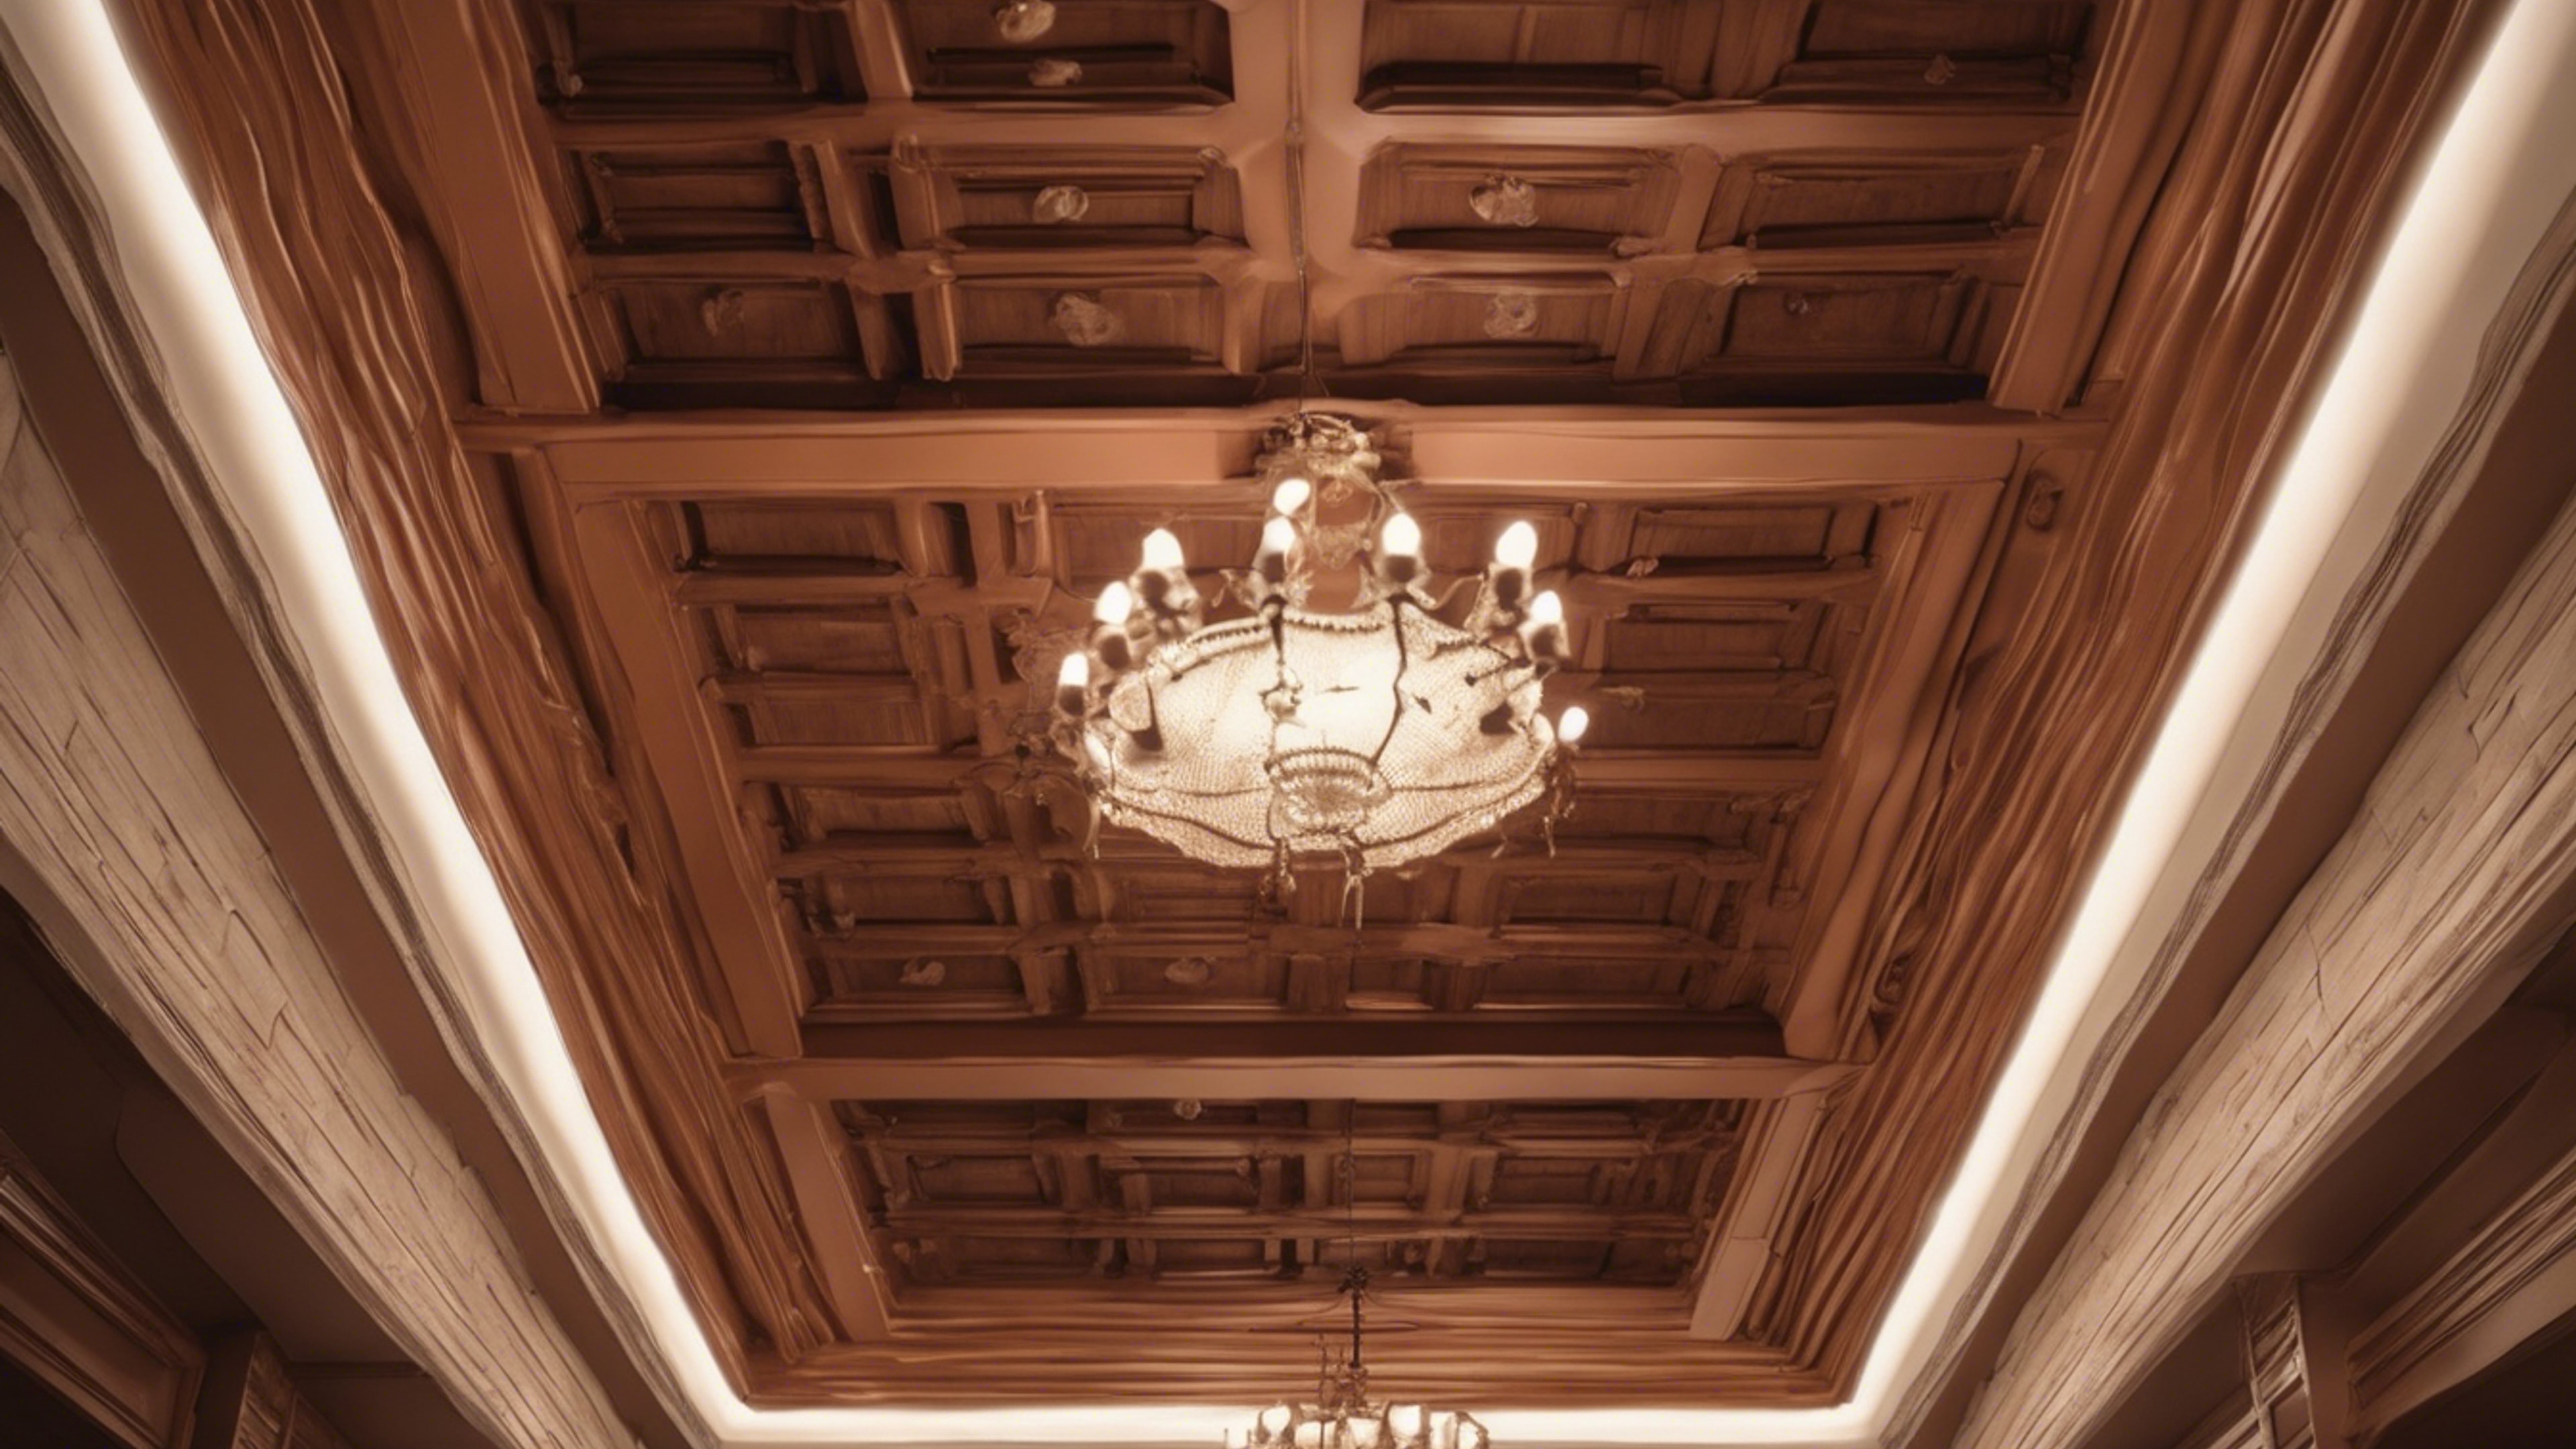 A warm brown coffered ceiling room decorated in traditional style Валлпапер[0b856da927b2485ba9d5]